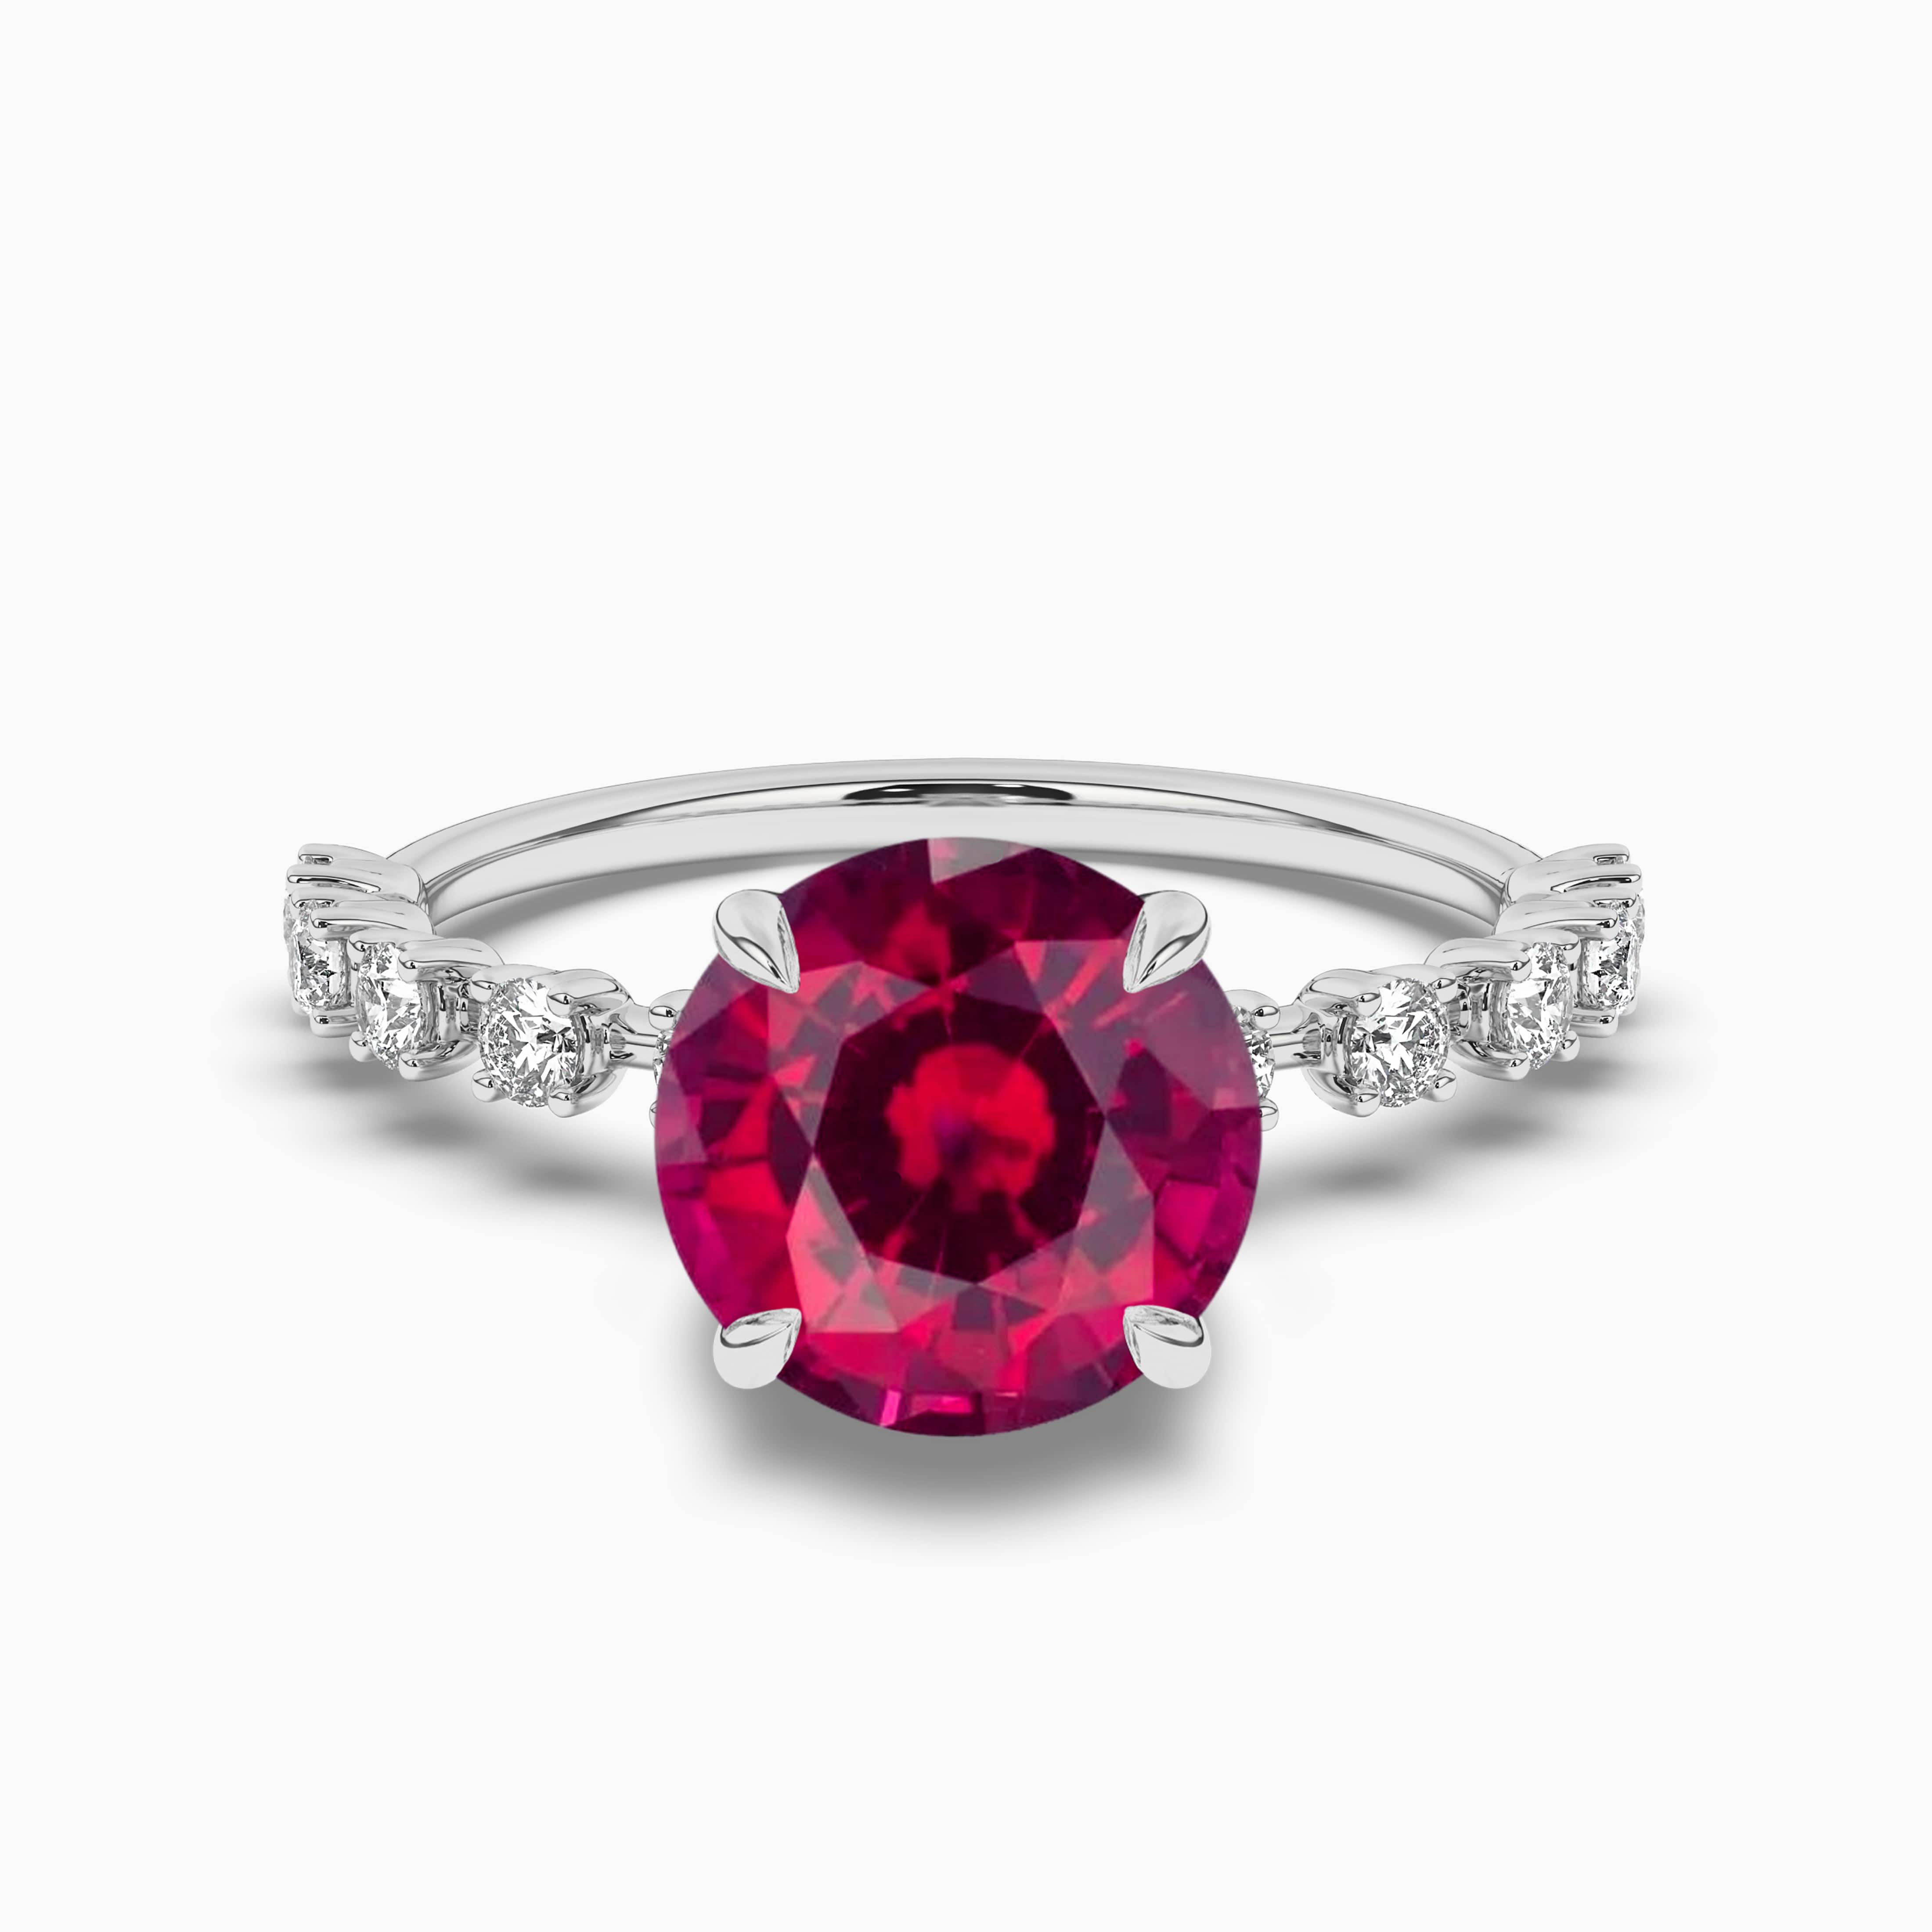 WHITE GOLD RUBY WITH CRYSTAL ROUND FINGER RINGS